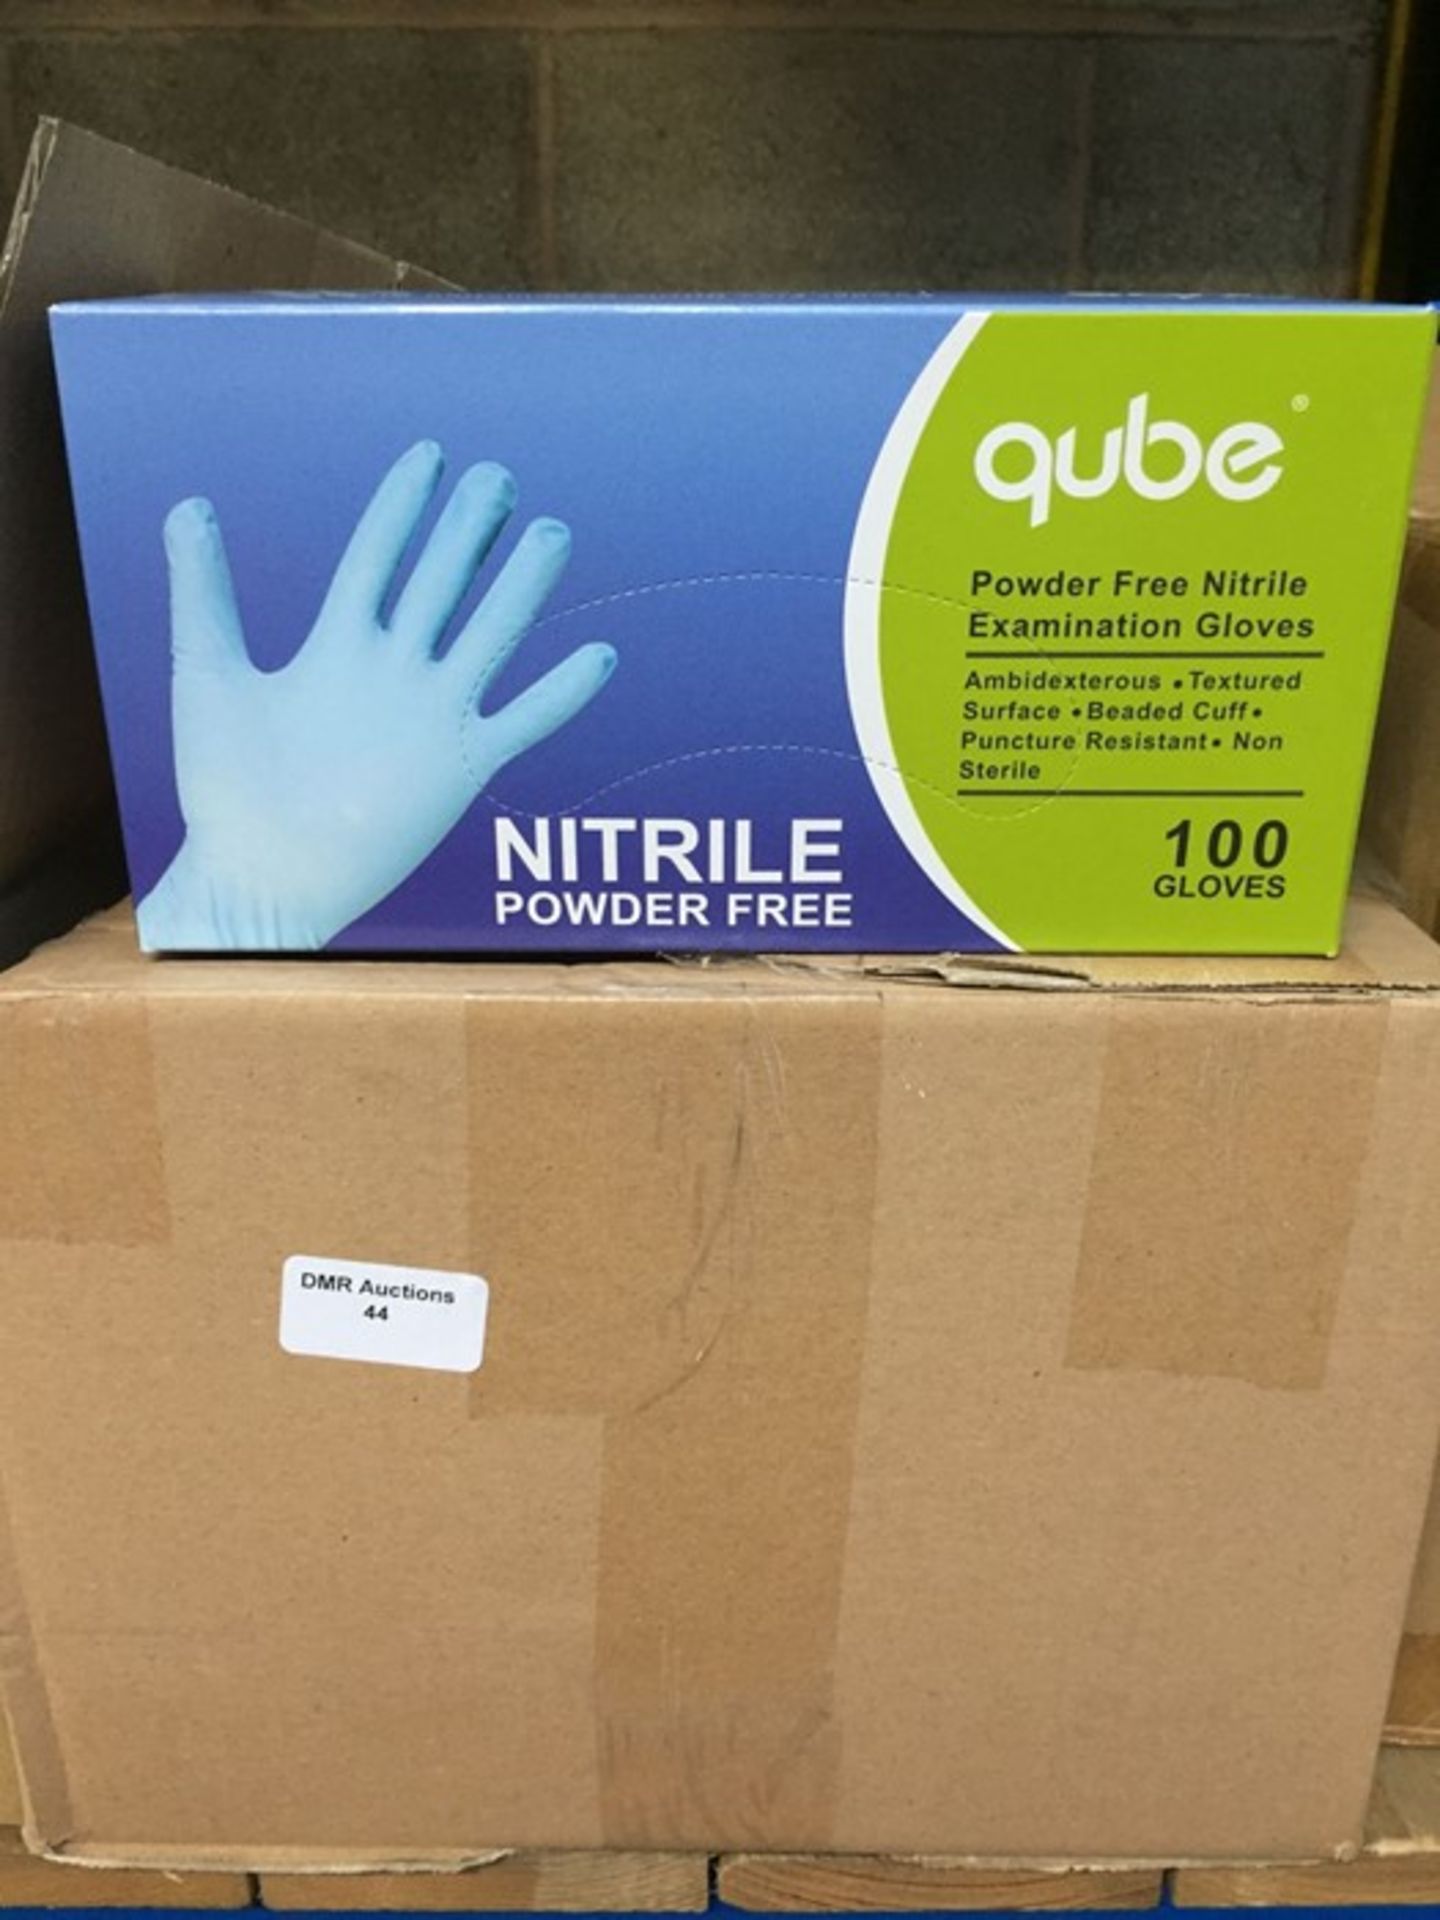 1 LOT TO CONTAIN 10 BOXES OF QUBE POWDER FREE NITRILE EXAMINATION GLOVES IN BLUE, 100 GLOVES PER